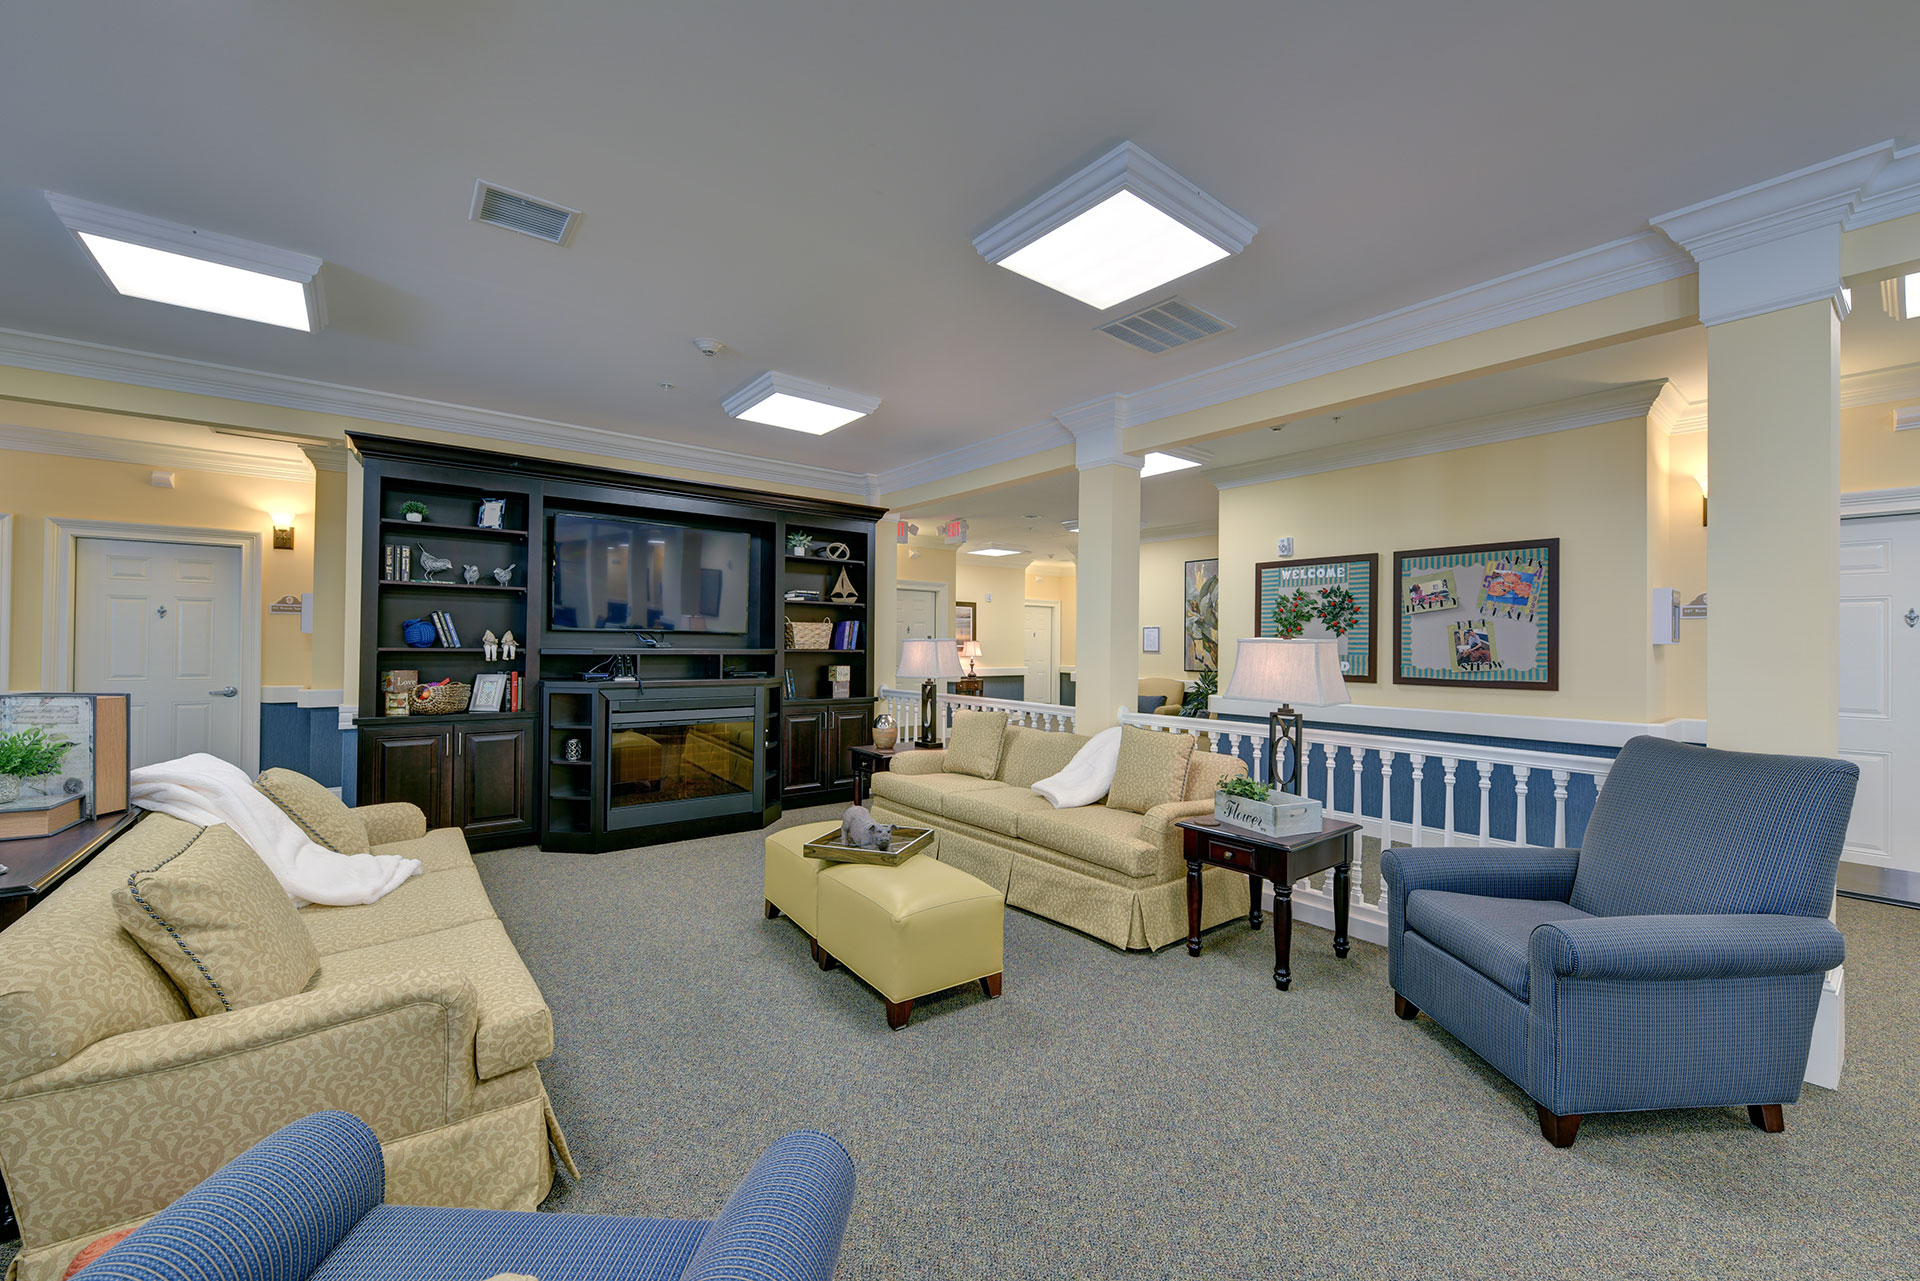 What Will You Find at an Assisted Living Community in Bluffton?